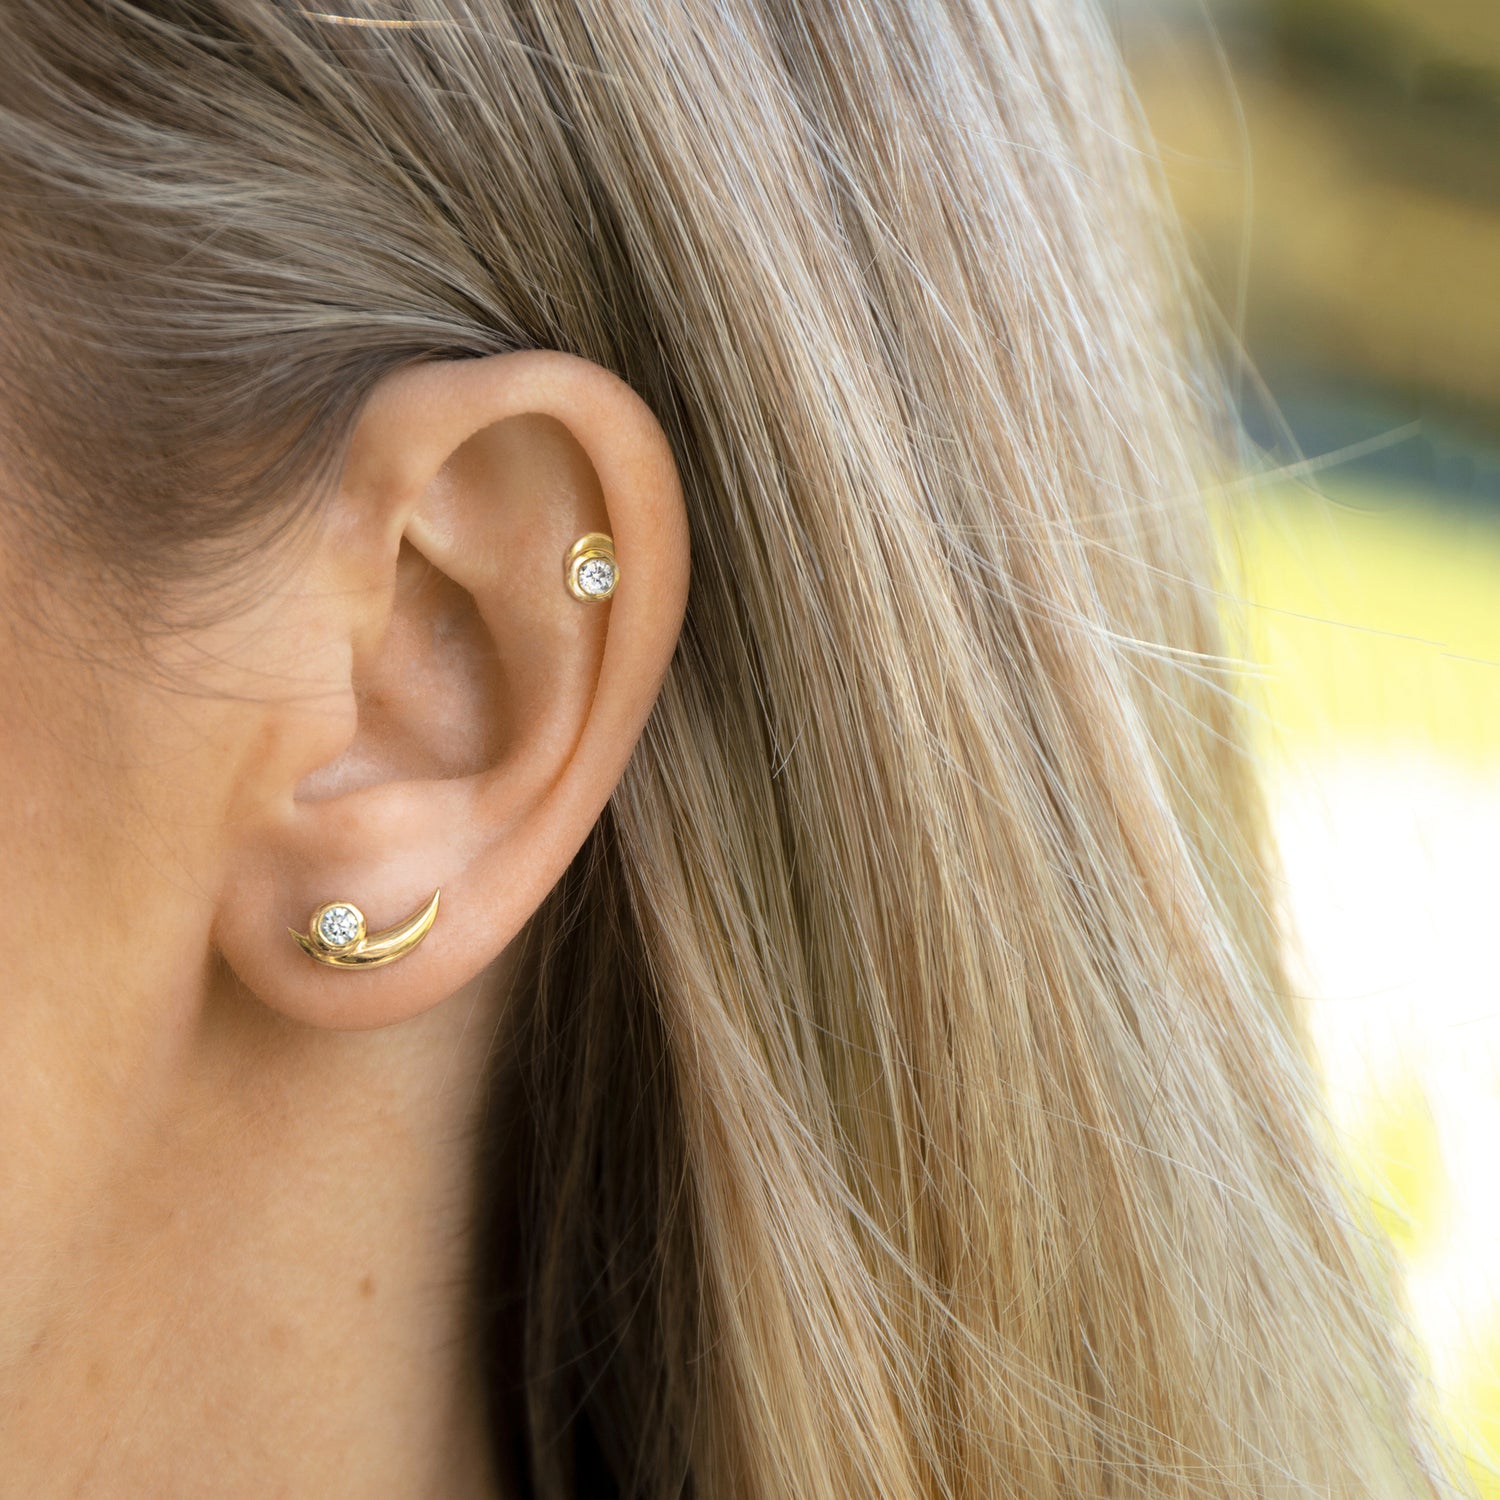 solid gold lab diamond earrings on lobe and helix